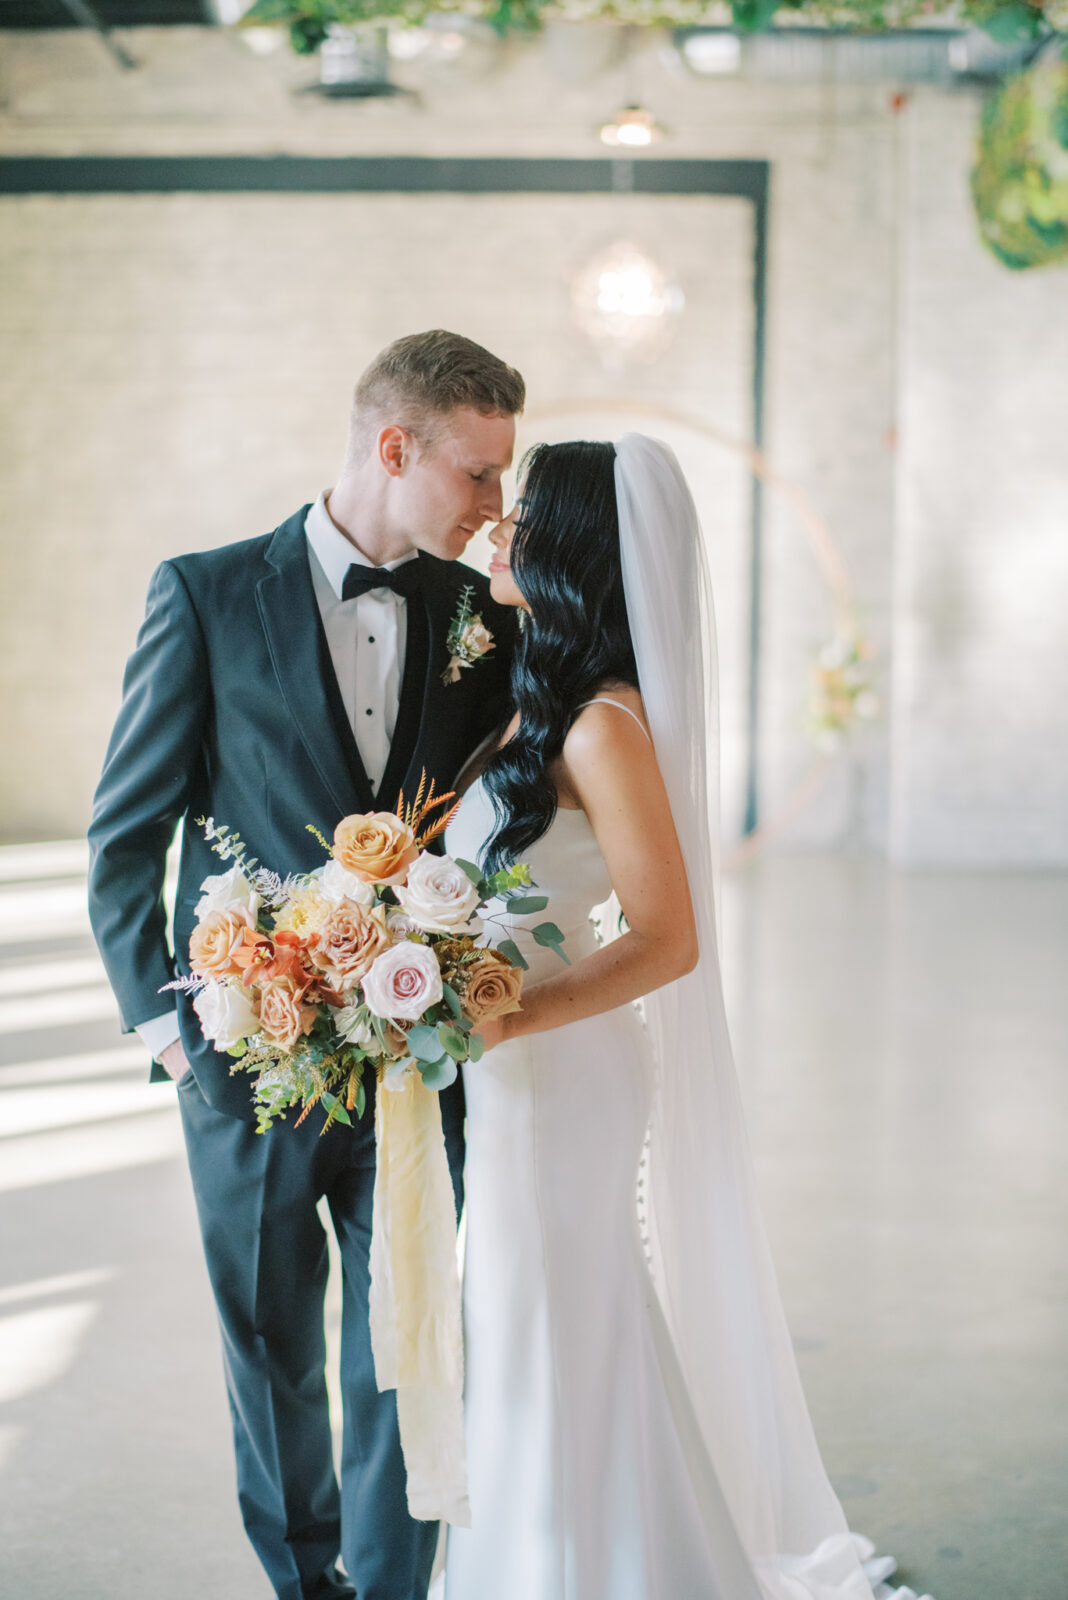 bride and groom in modern wedding day attire for fall wedding, romantic couples portrait ideas, October wedding colour scheme for bouquet featuring long bouquet tie 